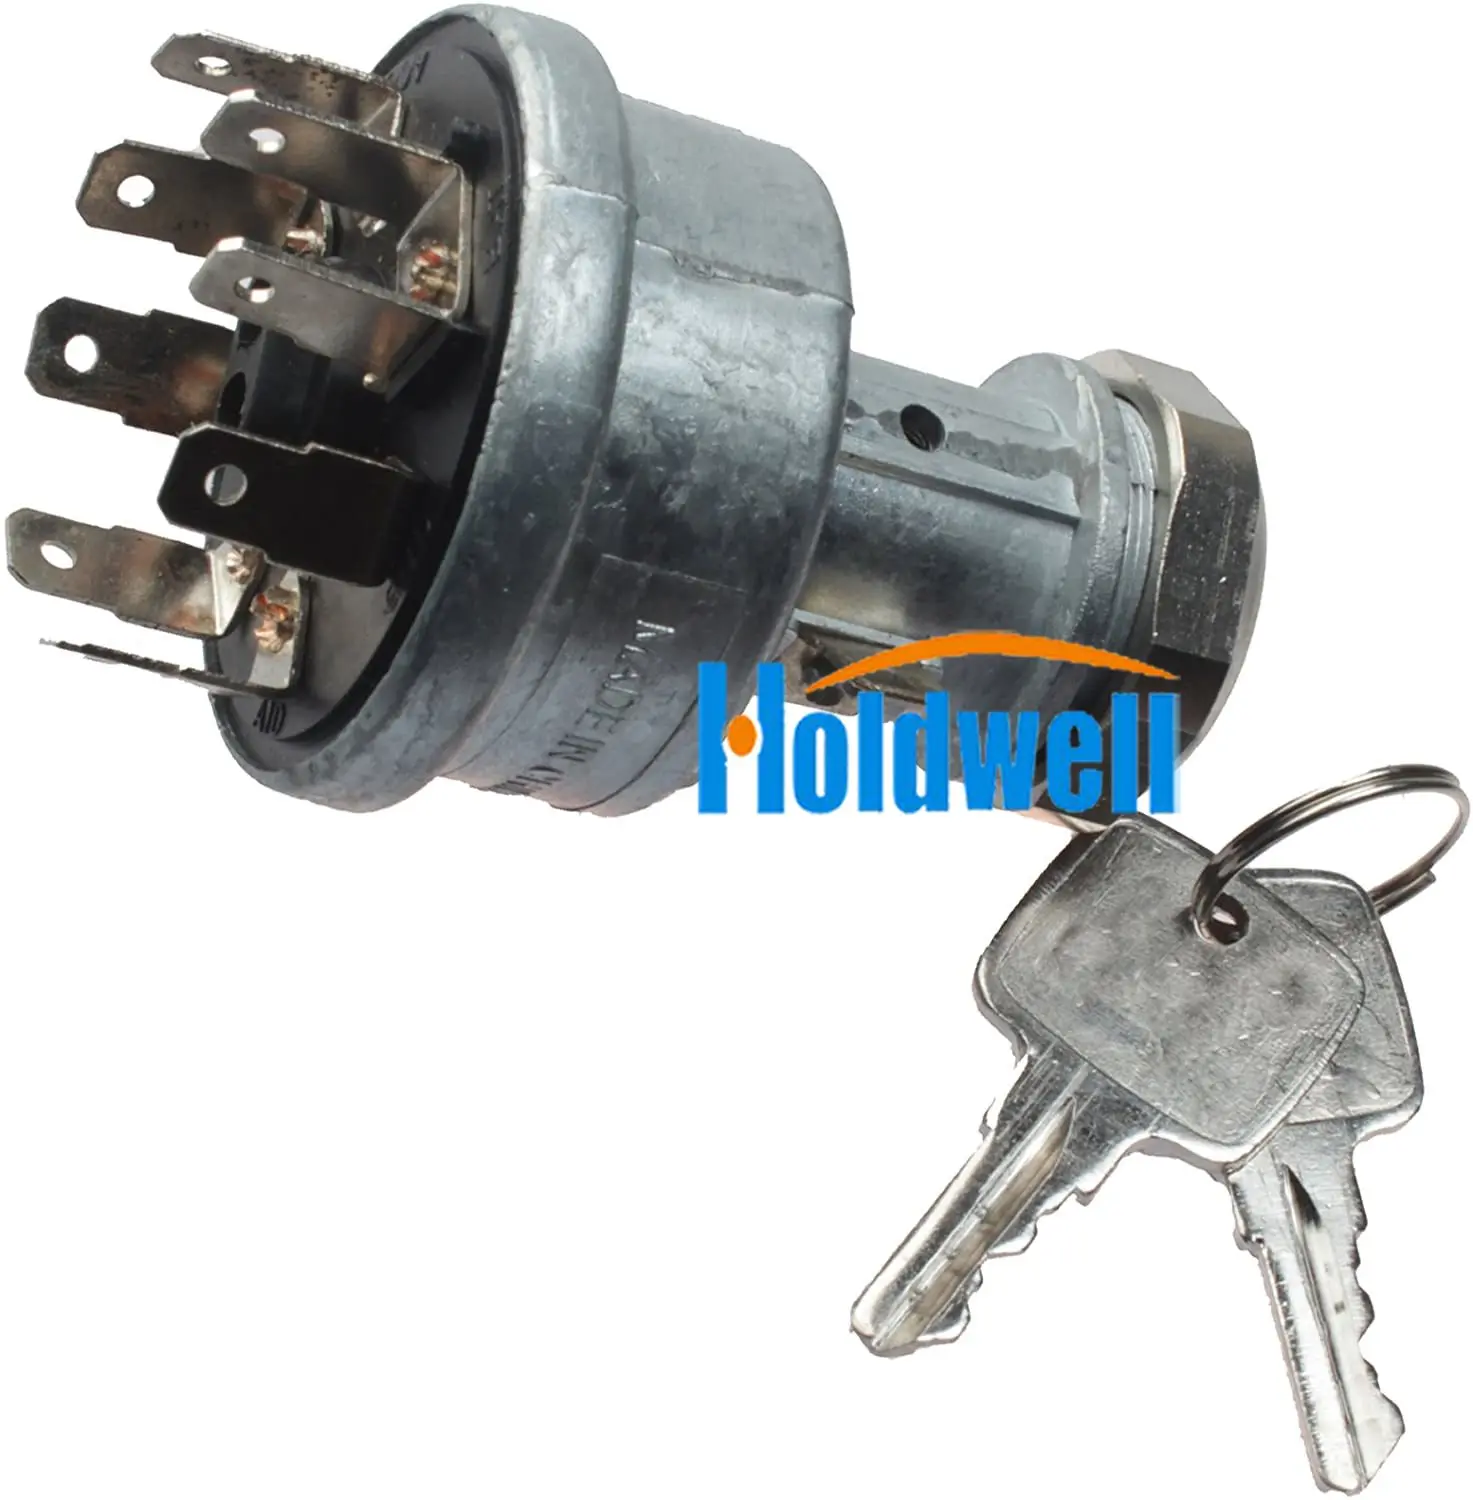 

Holdwell Rotary Switch RE45963 for John Deere 5200 5300 5400 5500 5210 5310 5410 5510 4200 4500 4300 4400 4600 4700